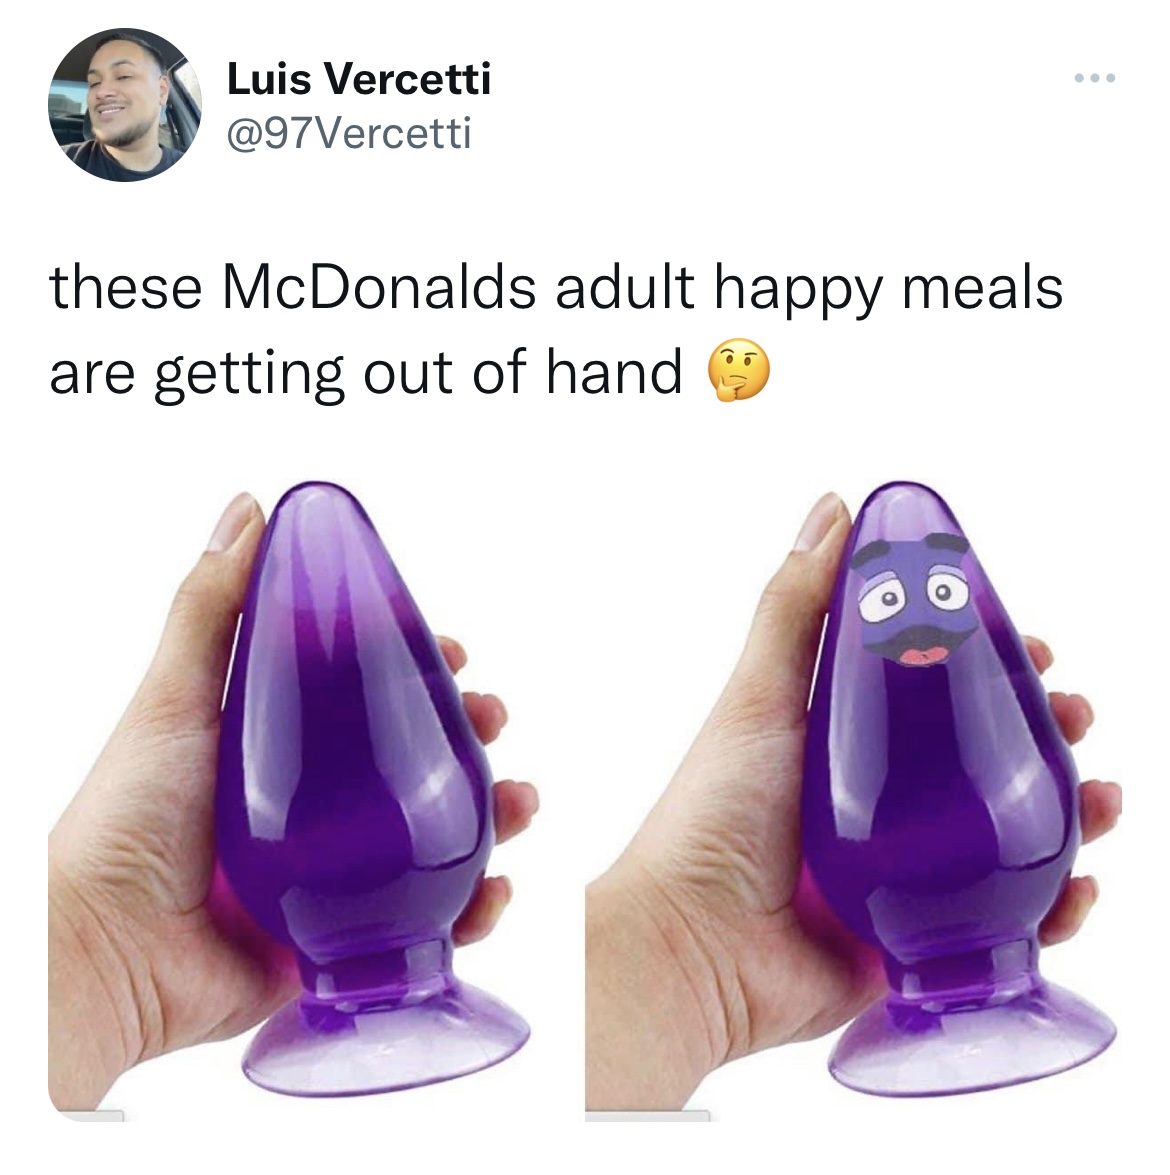 Savage and funny tweets - lavender - Luis Vercetti these McDonalds adult happy meals are getting out of hand